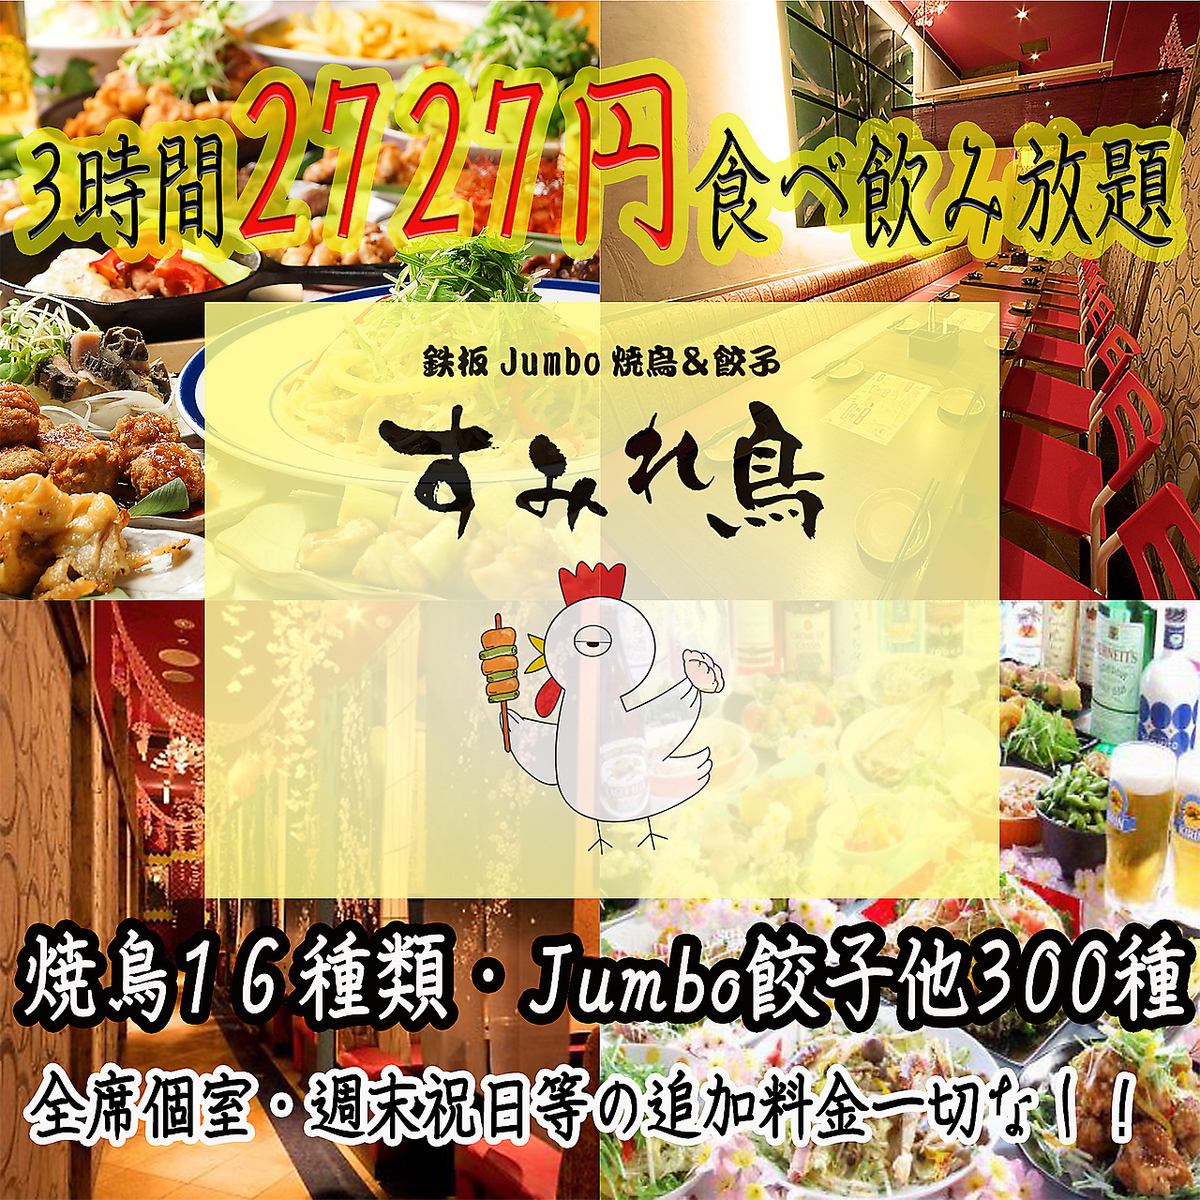 All you can eat and drink for 3 hours ☆ All you can eat yakitori and chicken hotpot for 2,999 yen (tax included)